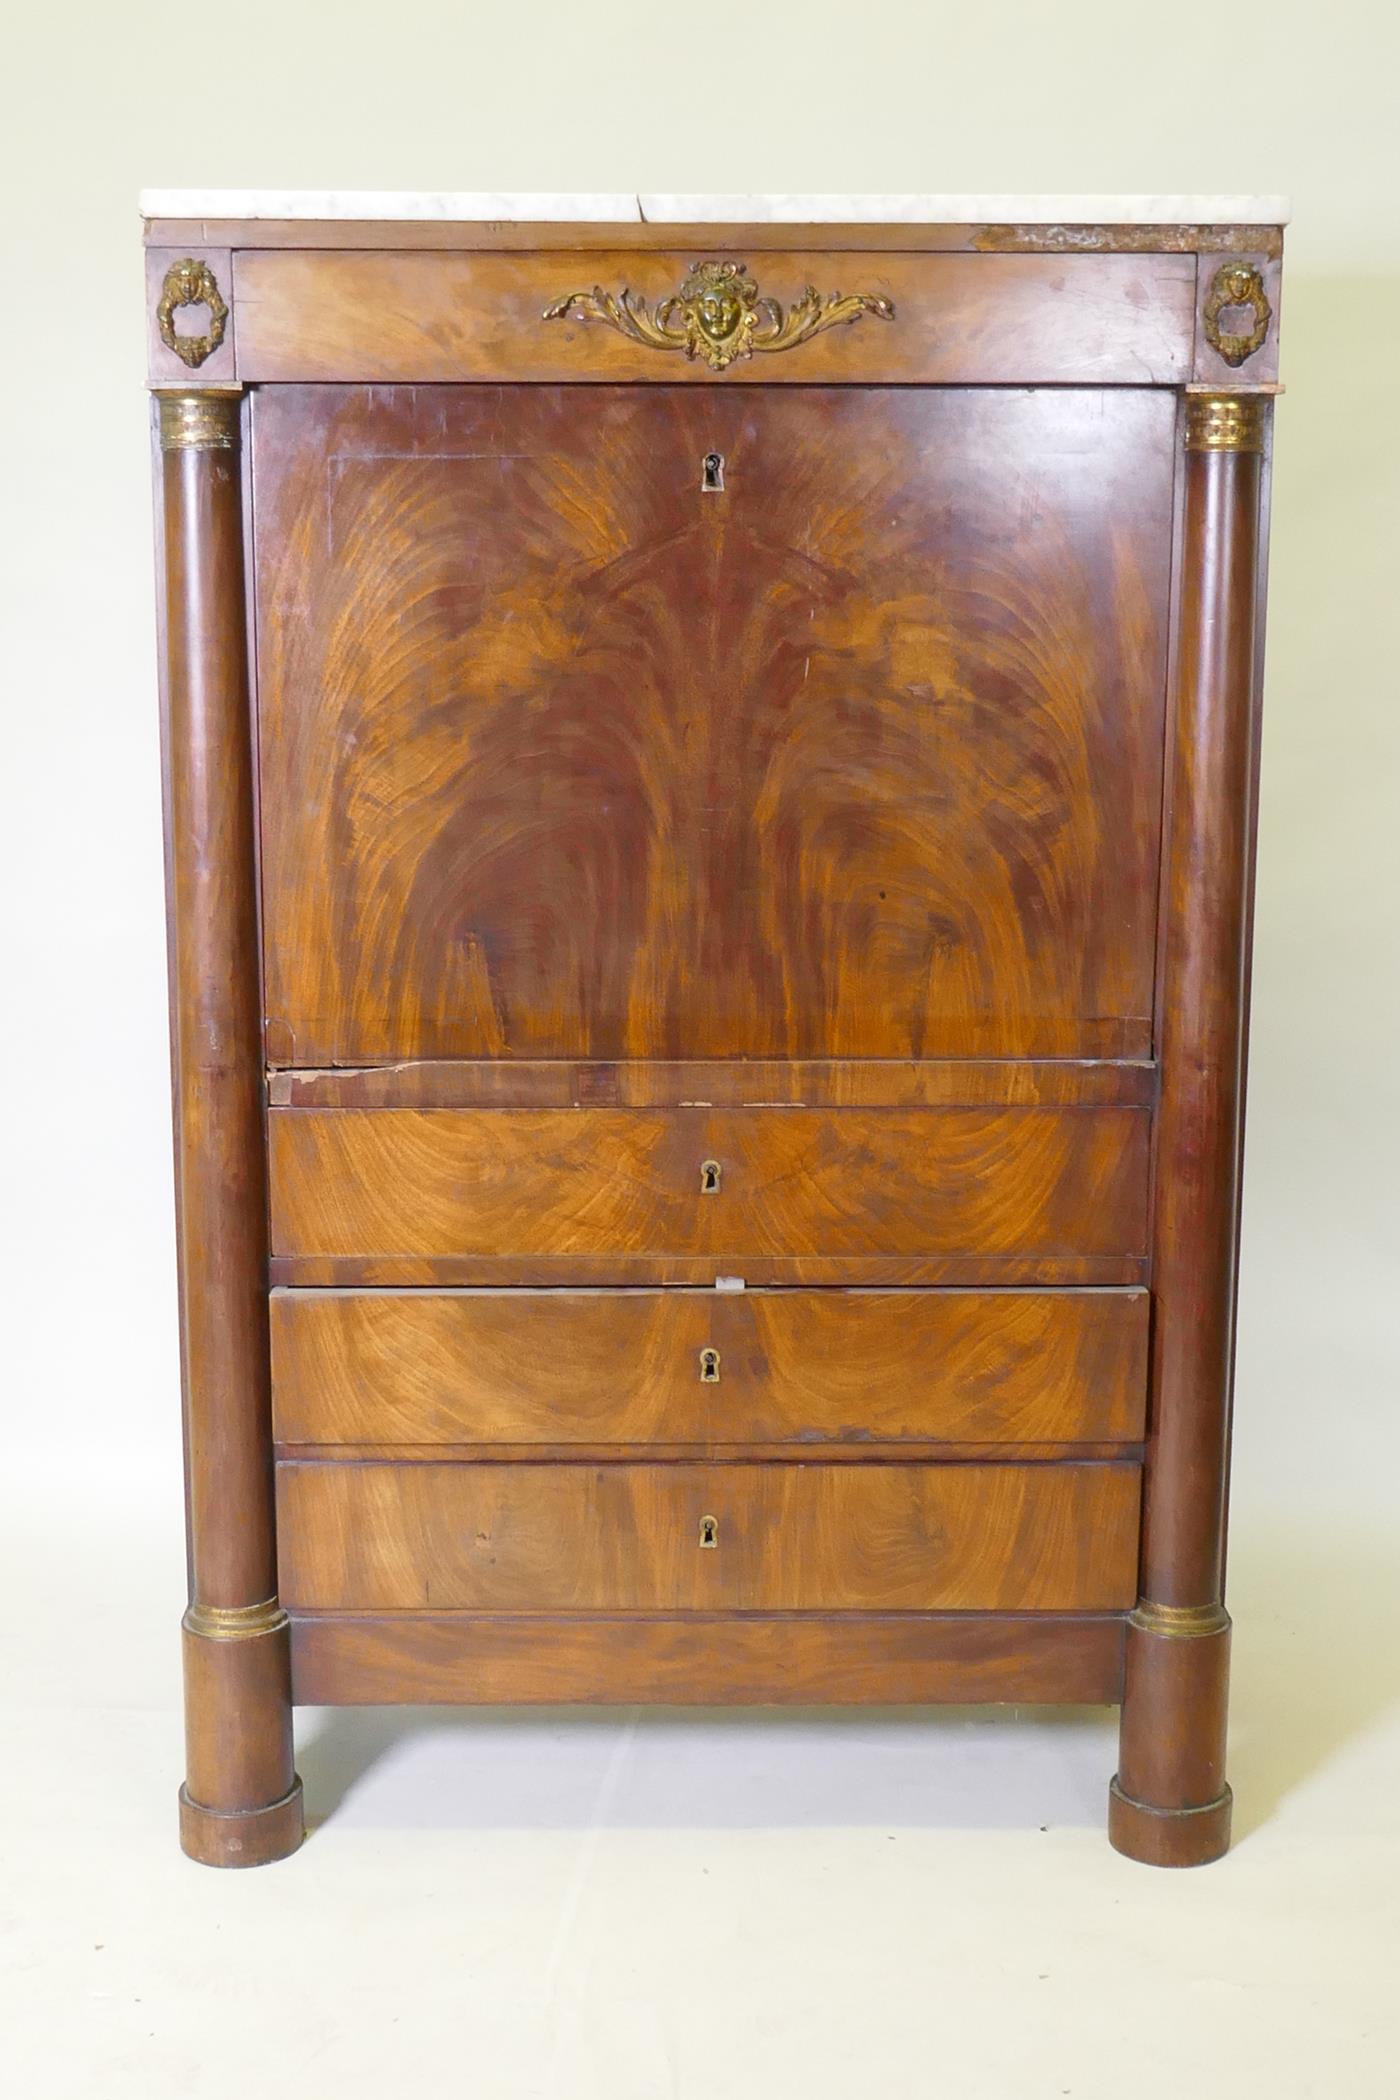 A C19th continental figured mahogany secretaire a abattant with ormolu mounts and marble top over